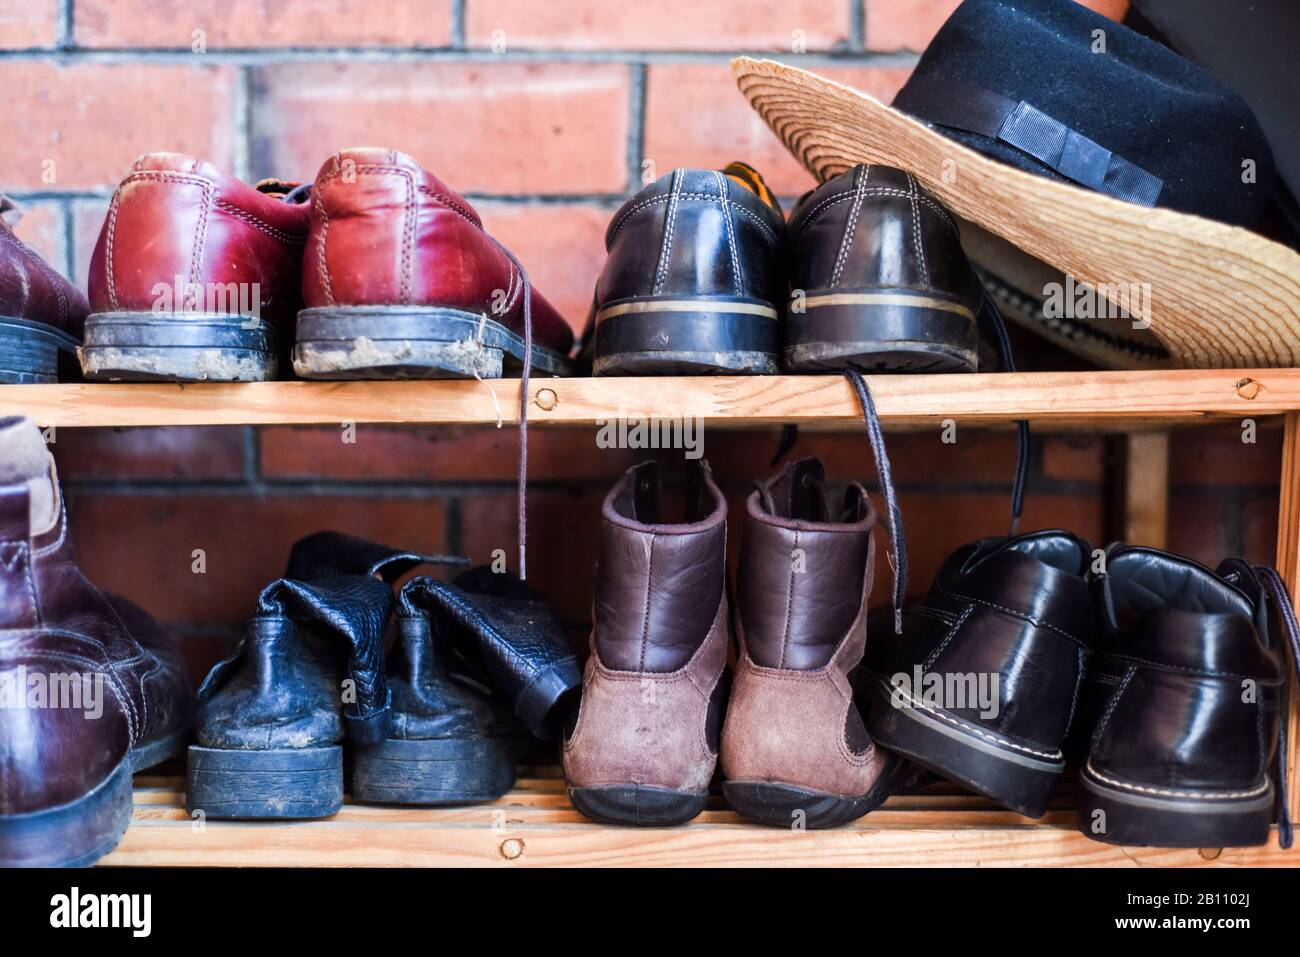 Shoe rack with family storage space for shoes in domestic home Stock Photo